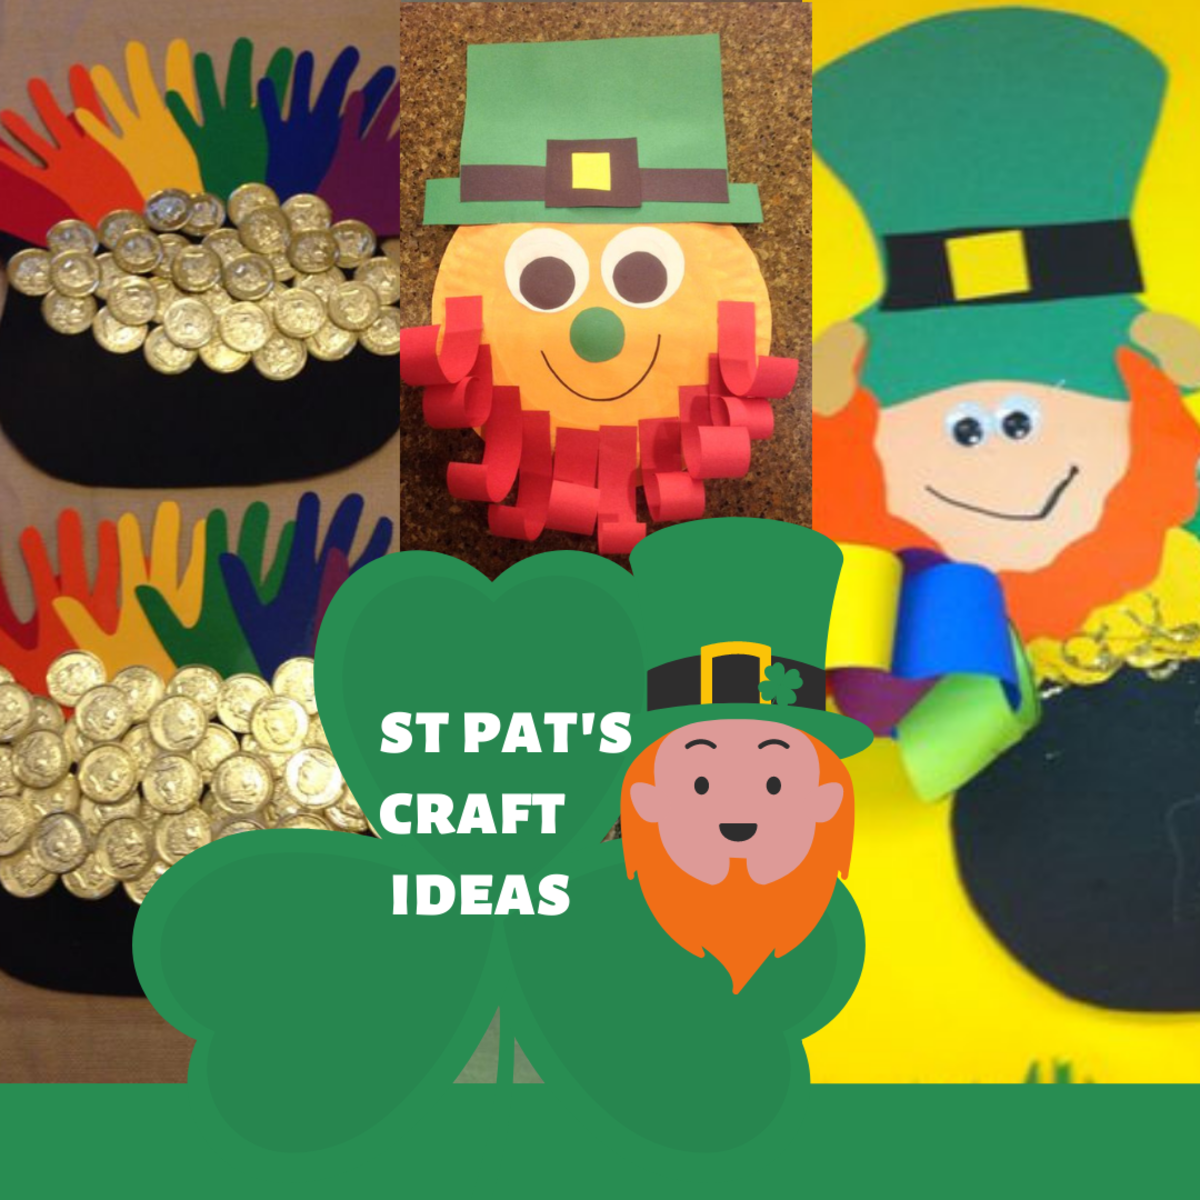 40+ Adorable St Patricks Day Craft Ideas That Everyone Can Make